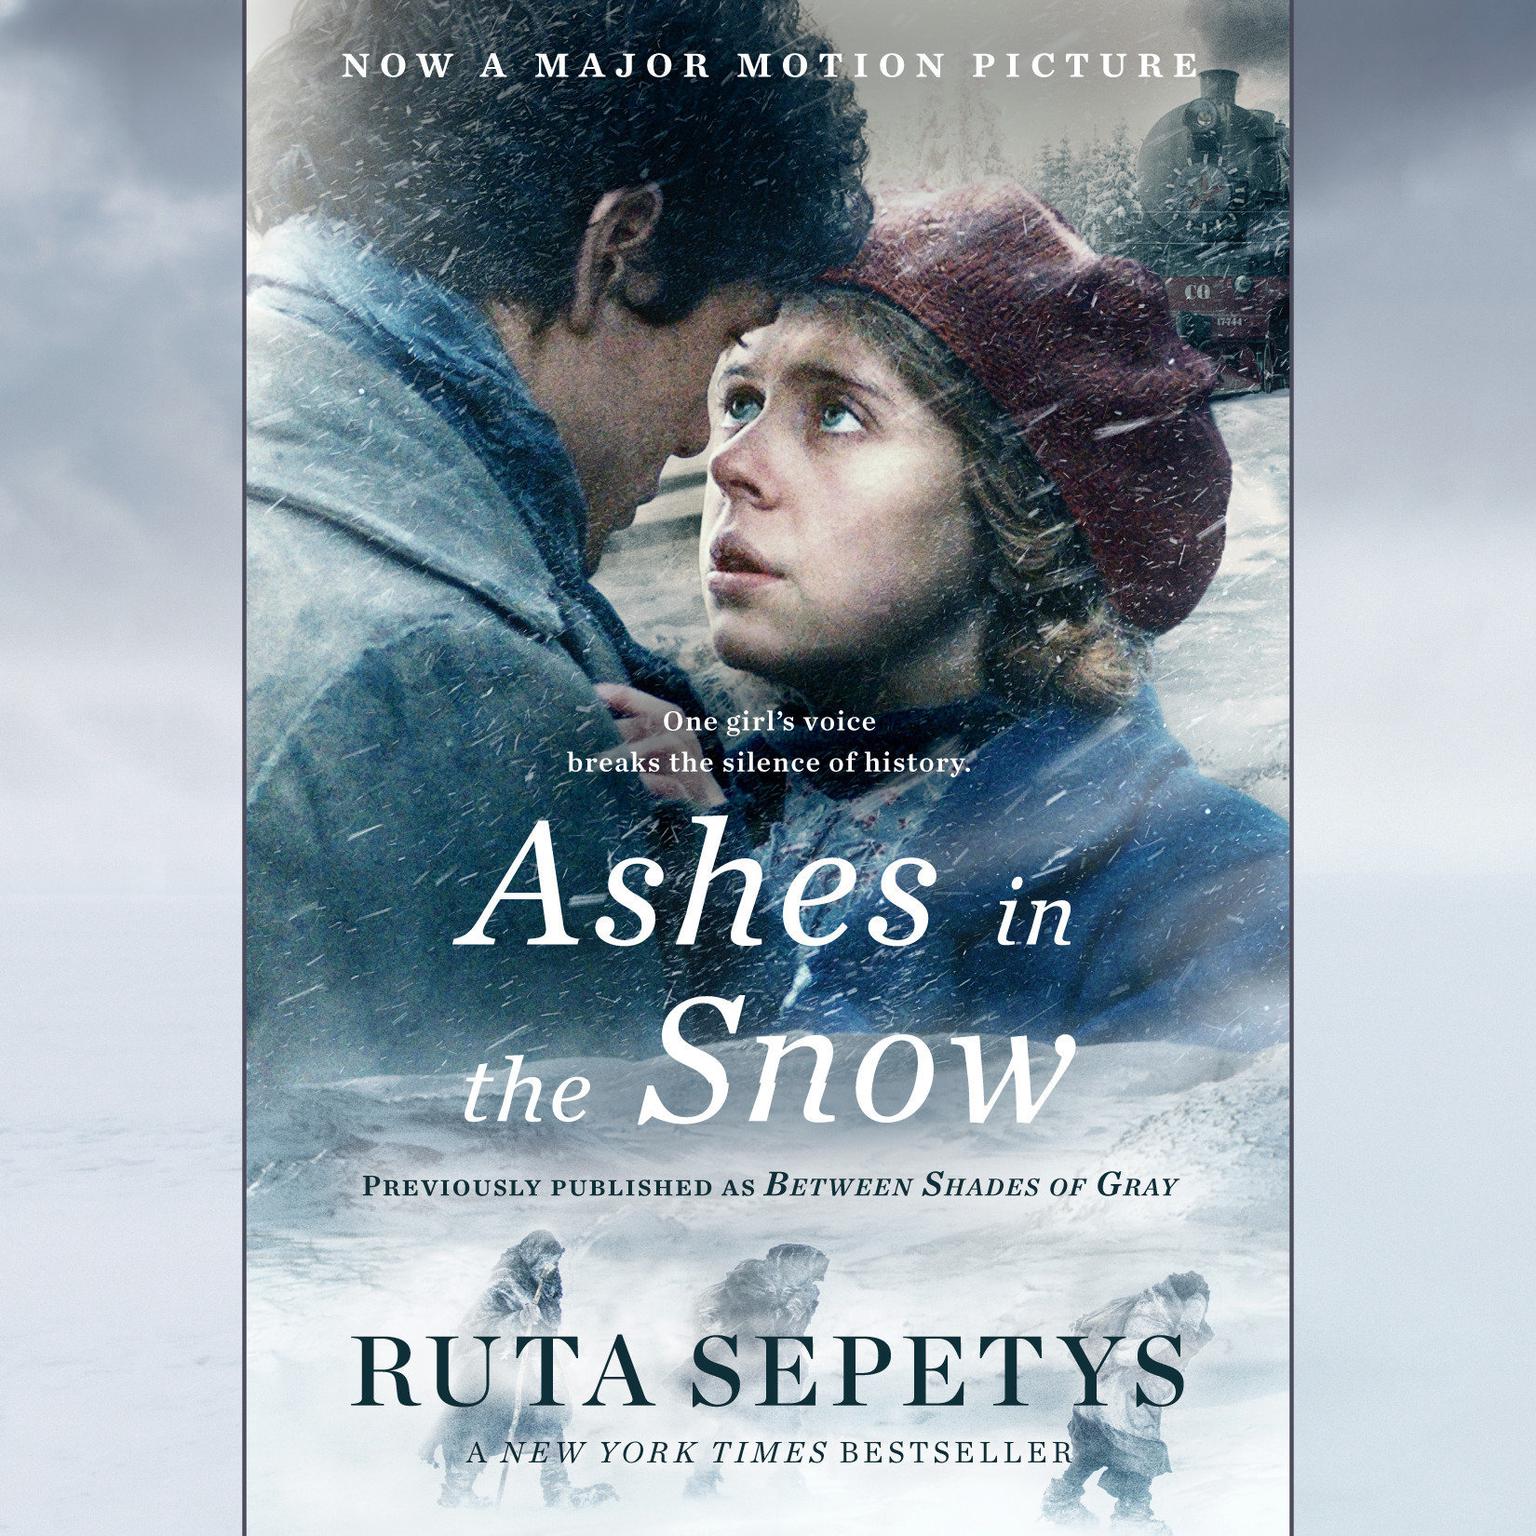 Ashes in the Snow (Movie Tie-In) Audiobook, by Ruta Sepetys